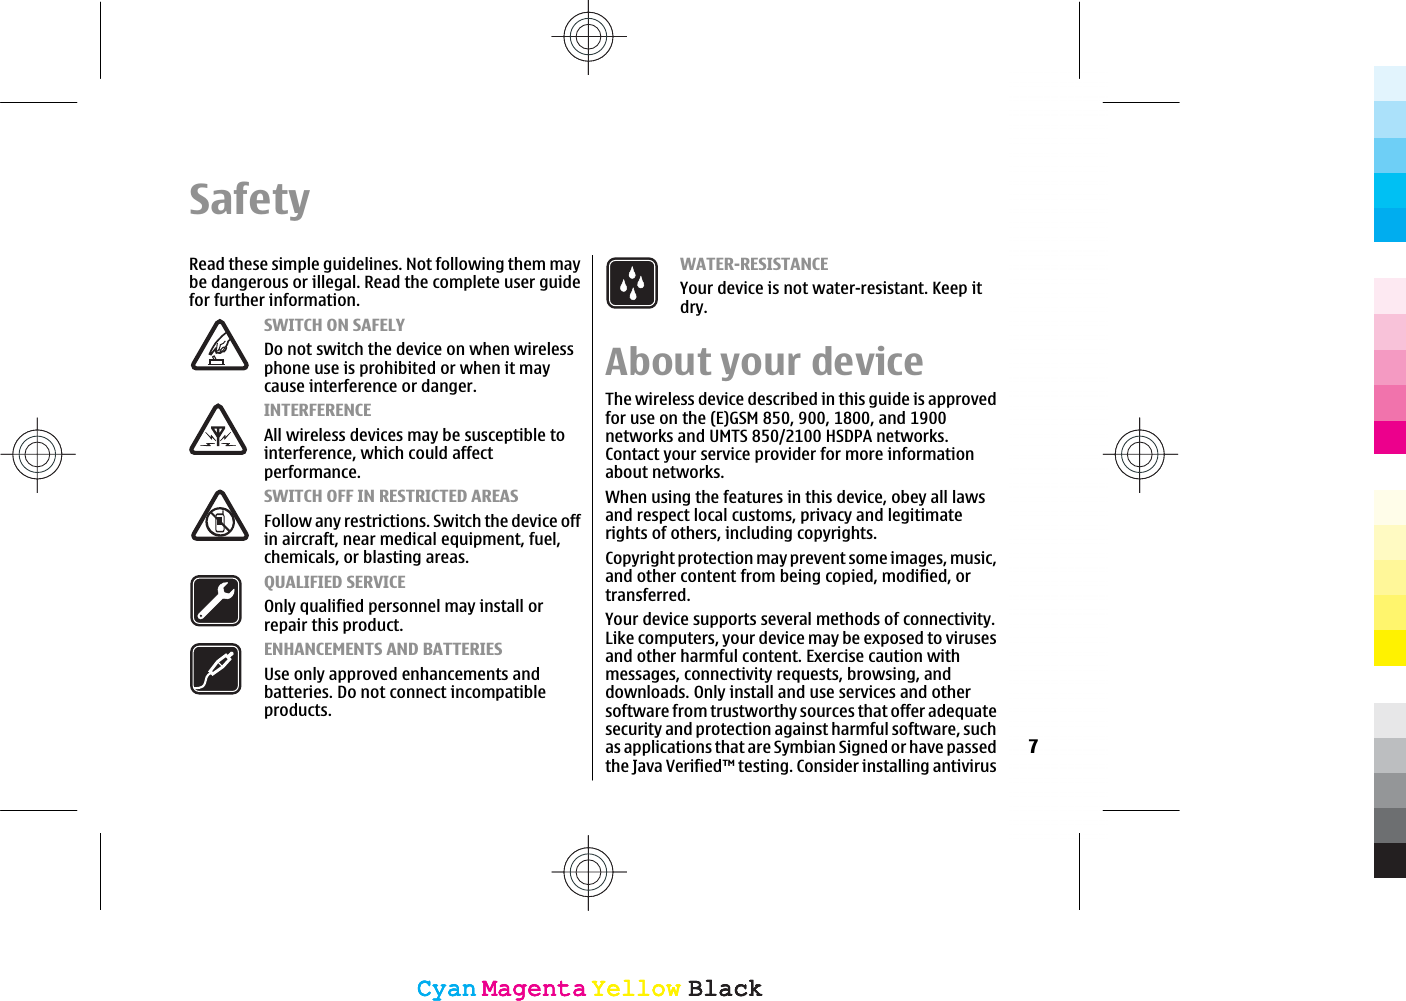 SafetyRead these simple guidelines. Not following them maybe dangerous or illegal. Read the complete user guidefor further information.SWITCH ON SAFELYDo not switch the device on when wirelessphone use is prohibited or when it maycause interference or danger.INTERFERENCEAll wireless devices may be susceptible tointerference, which could affectperformance.SWITCH OFF IN RESTRICTED AREASFollow any restrictions. Switch the device offin aircraft, near medical equipment, fuel,chemicals, or blasting areas.QUALIFIED SERVICEOnly qualified personnel may install orrepair this product.ENHANCEMENTS AND BATTERIESUse only approved enhancements andbatteries. Do not connect incompatibleproducts.WATER-RESISTANCEYour device is not water-resistant. Keep itdry.About your deviceThe wireless device described in this guide is approvedfor use on the (E)GSM 850, 900, 1800, and 1900networks and UMTS 850/2100 HSDPA networks.Contact your service provider for more informationabout networks.When using the features in this device, obey all lawsand respect local customs, privacy and legitimaterights of others, including copyrights.Copyright protection may prevent some images, music,and other content from being copied, modified, ortransferred.Your device supports several methods of connectivity.Like computers, your device may be exposed to virusesand other harmful content. Exercise caution withmessages, connectivity requests, browsing, anddownloads. Only install and use services and othersoftware from trustworthy sources that offer adequatesecurity and protection against harmful software, suchas applications that are Symbian Signed or have passedthe Java Verified™ testing. Consider installing antivirus7CyanCyanMagentaMagentaYellowYellowBlackBlackCyanCyanMagentaMagentaYellowYellowBlackBlack